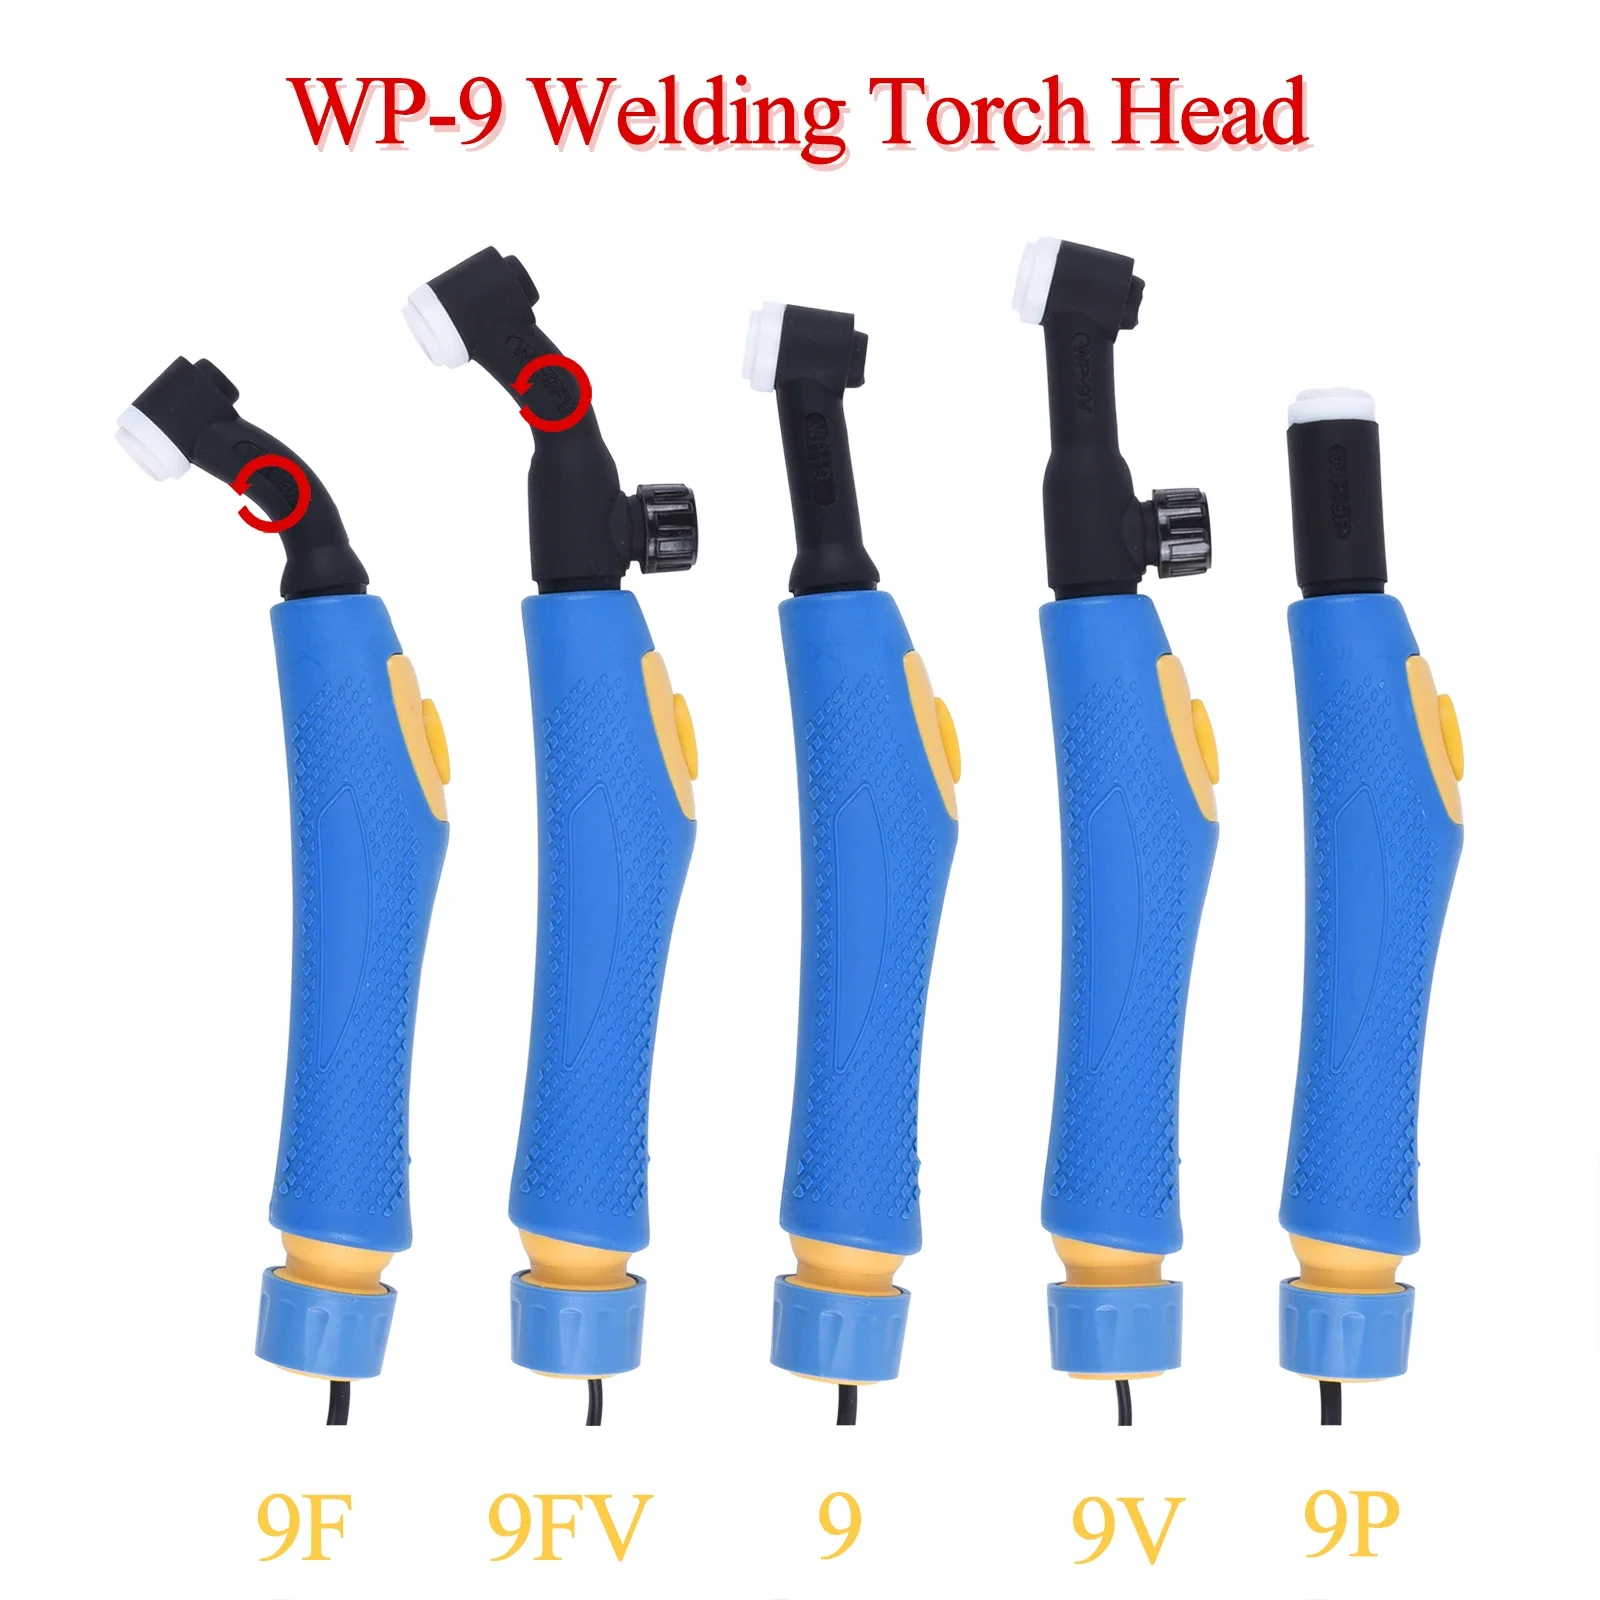 

WP9 WP 9F 9F 9V 9FV 9P SR9 SR9F SR9V SR9FV SR9P TIG Torch Body Air Cooled Head Human Engineering Design Rotatable 125 AMP